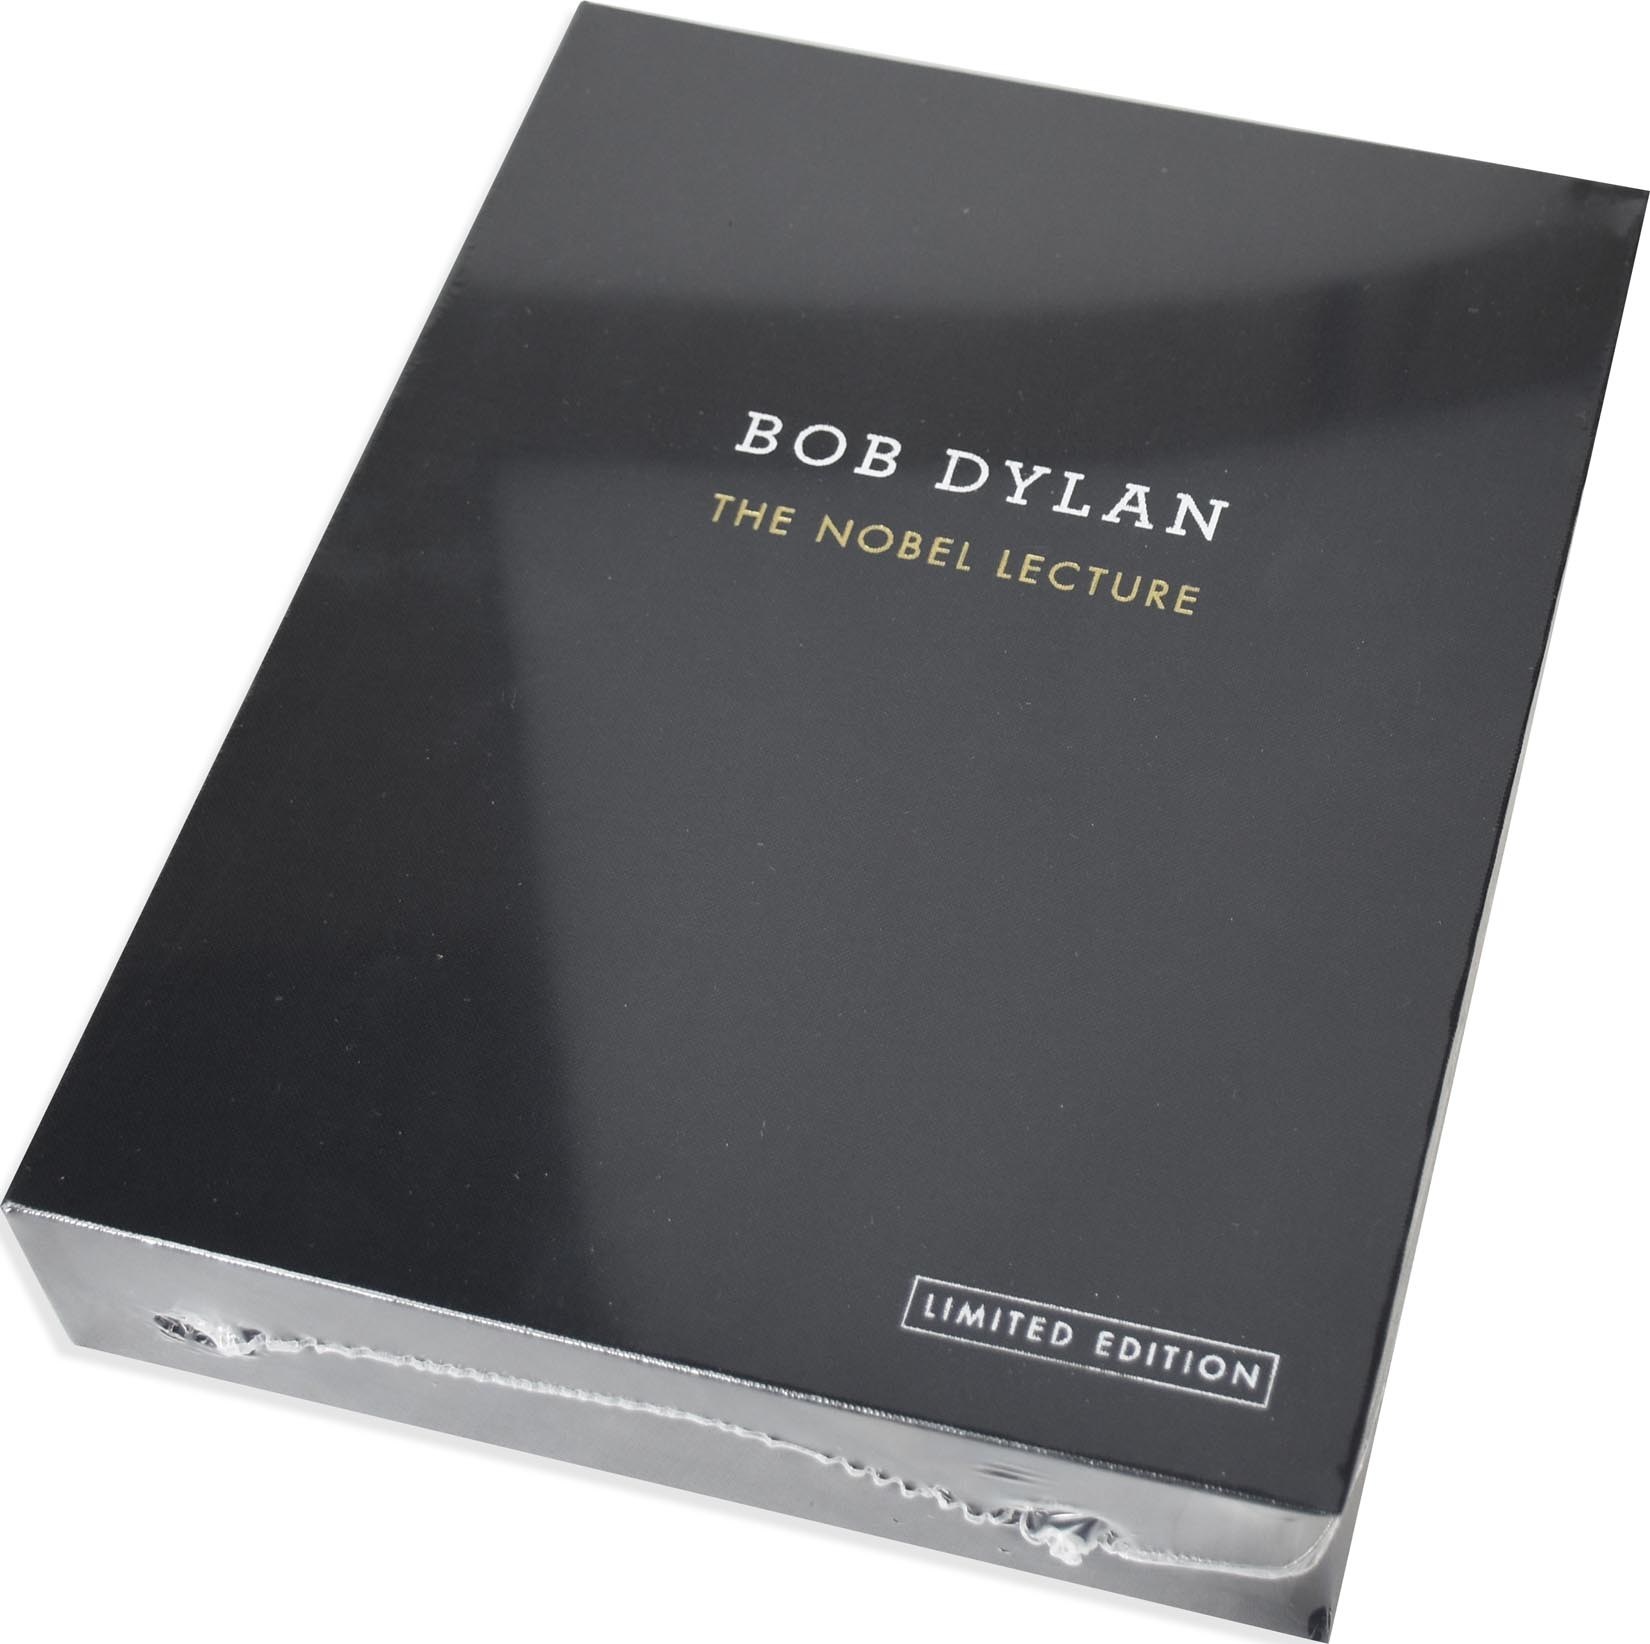 Rock And Pop Culture - Bob Dylan Signed "The Nobel Lecture" LE/100